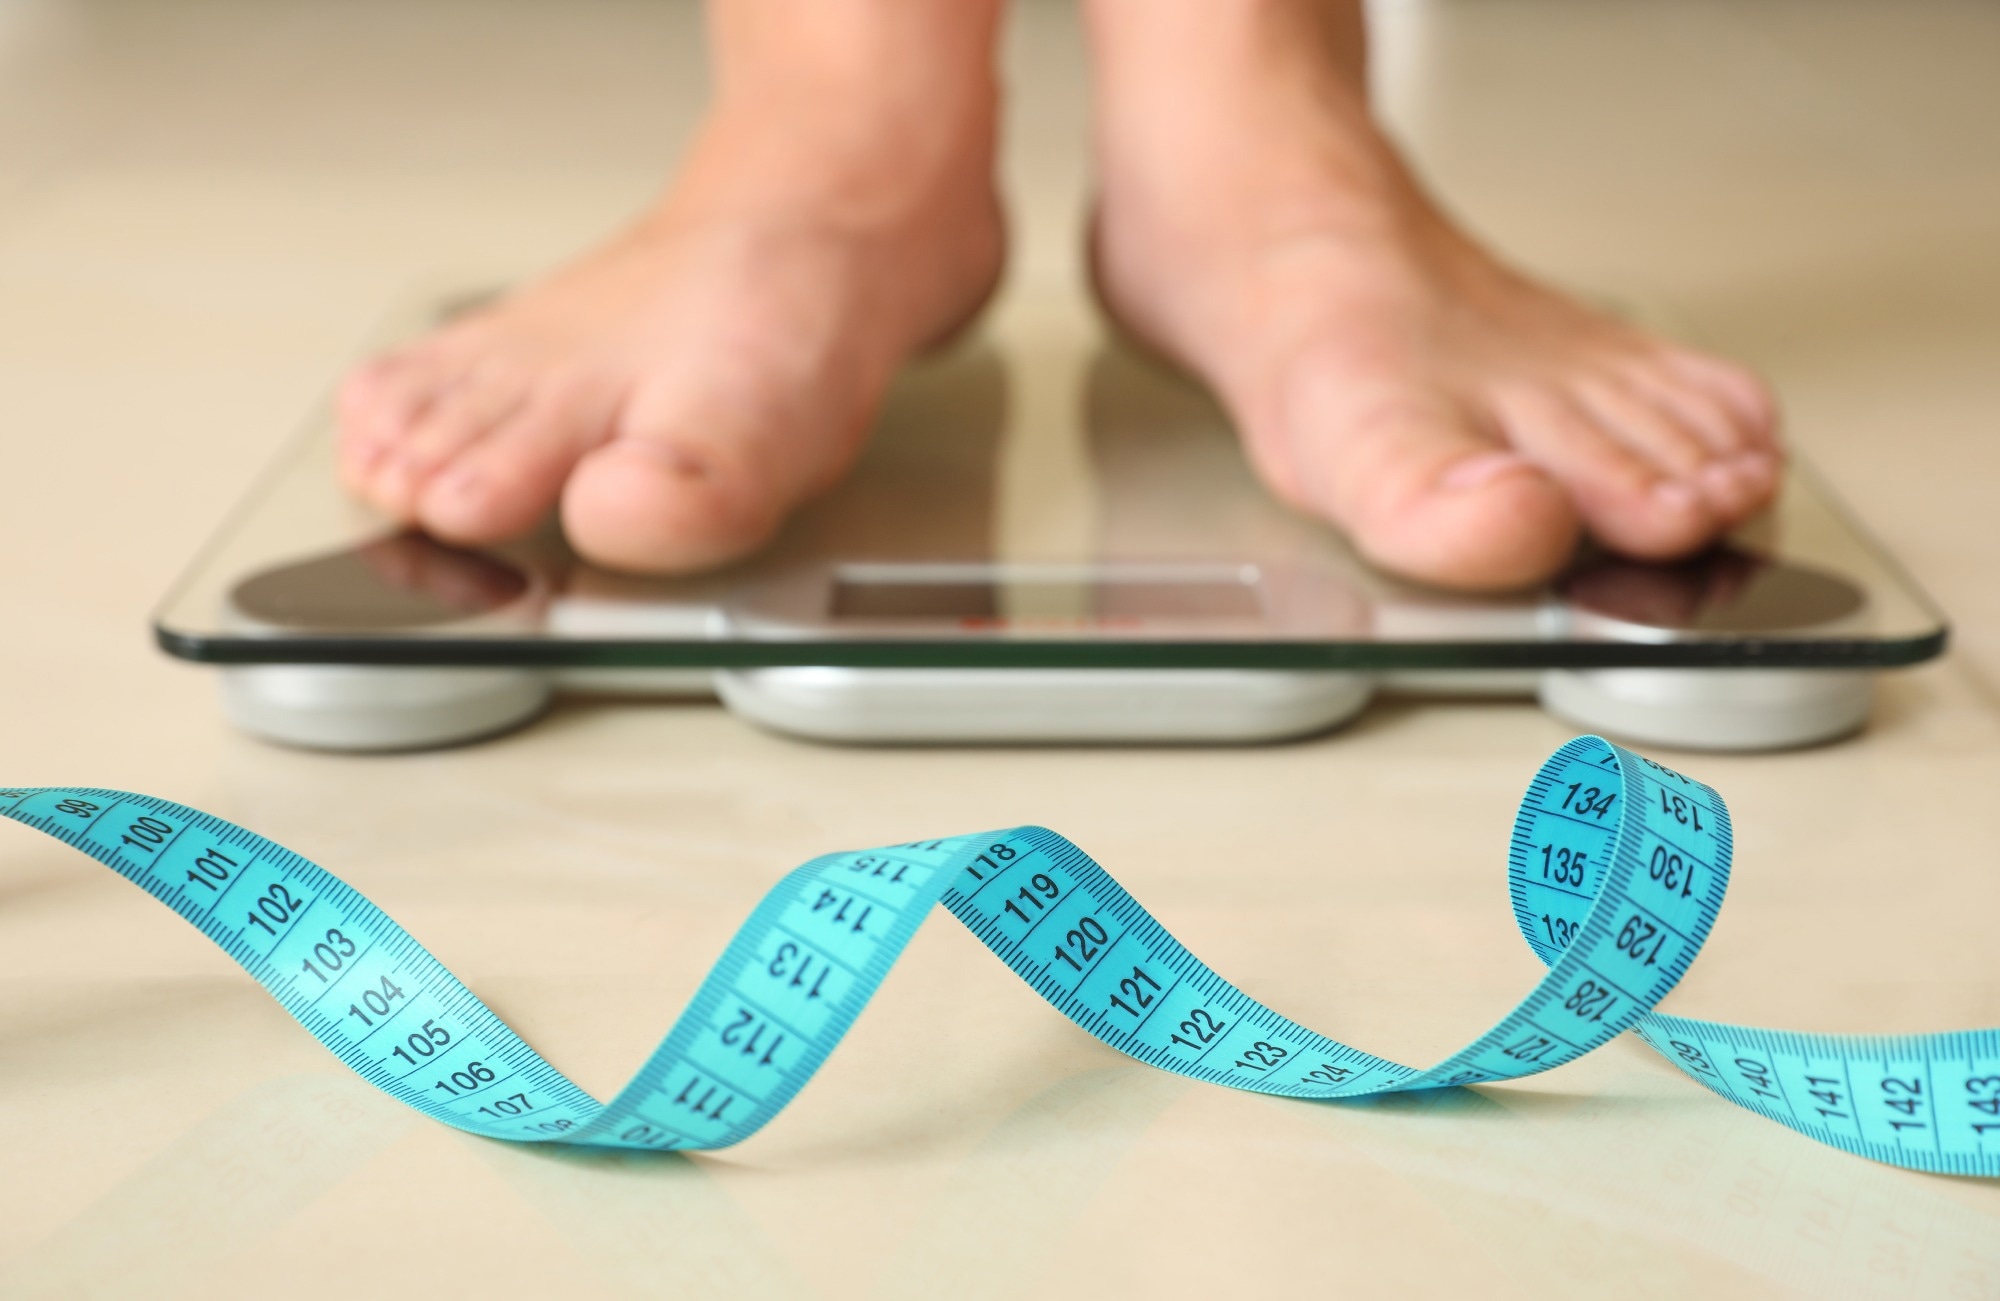 Study: Genetic causal role of body mass index in multiple neurological diseases. Image Credit: New Africa/Shutterstock.com